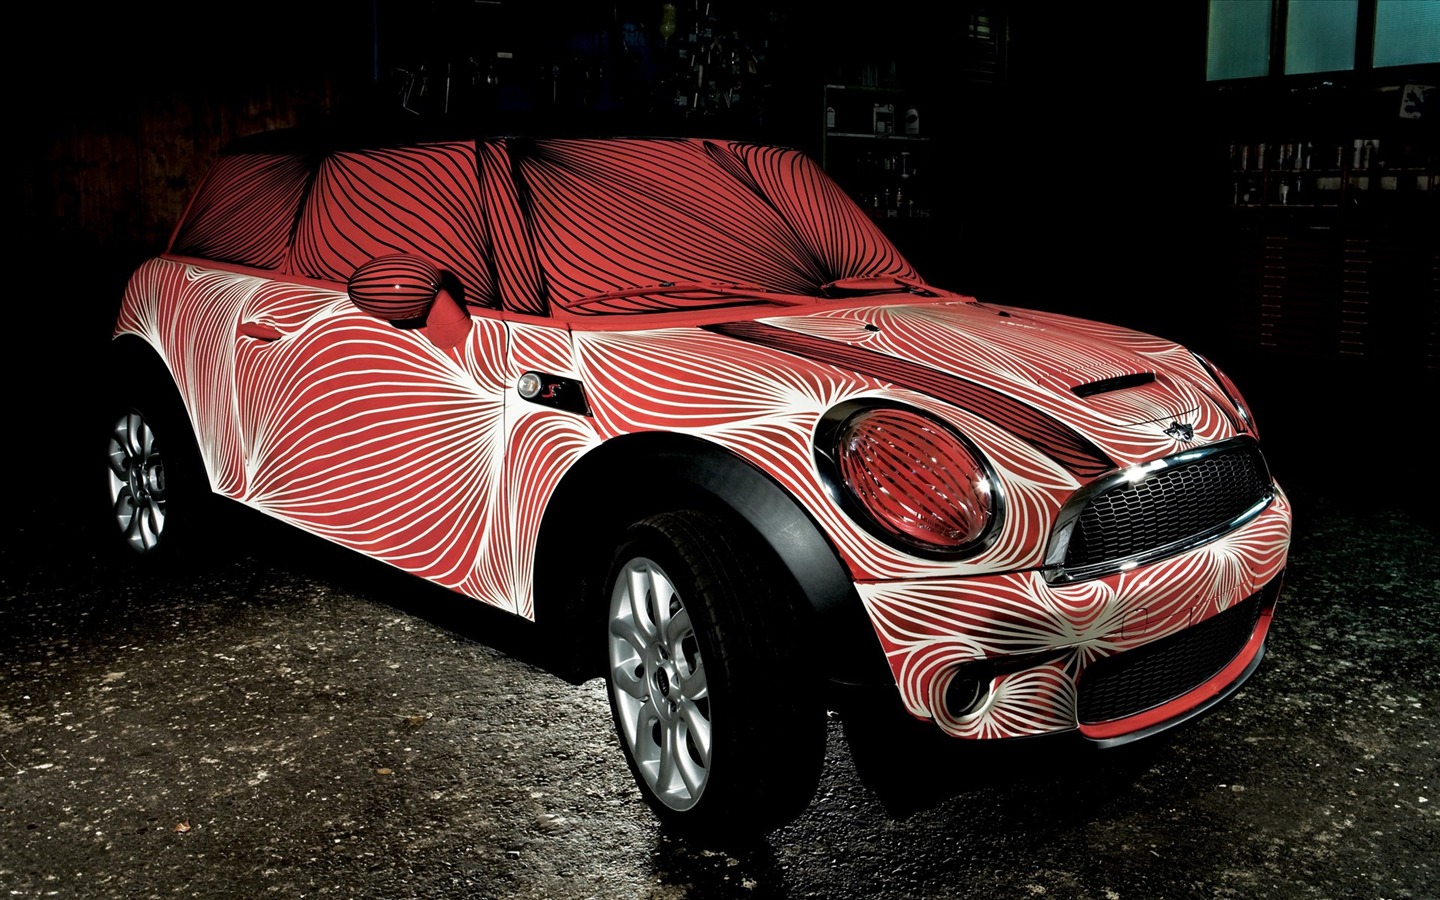 Personalized painted car wallpaper #21 - 1440x900